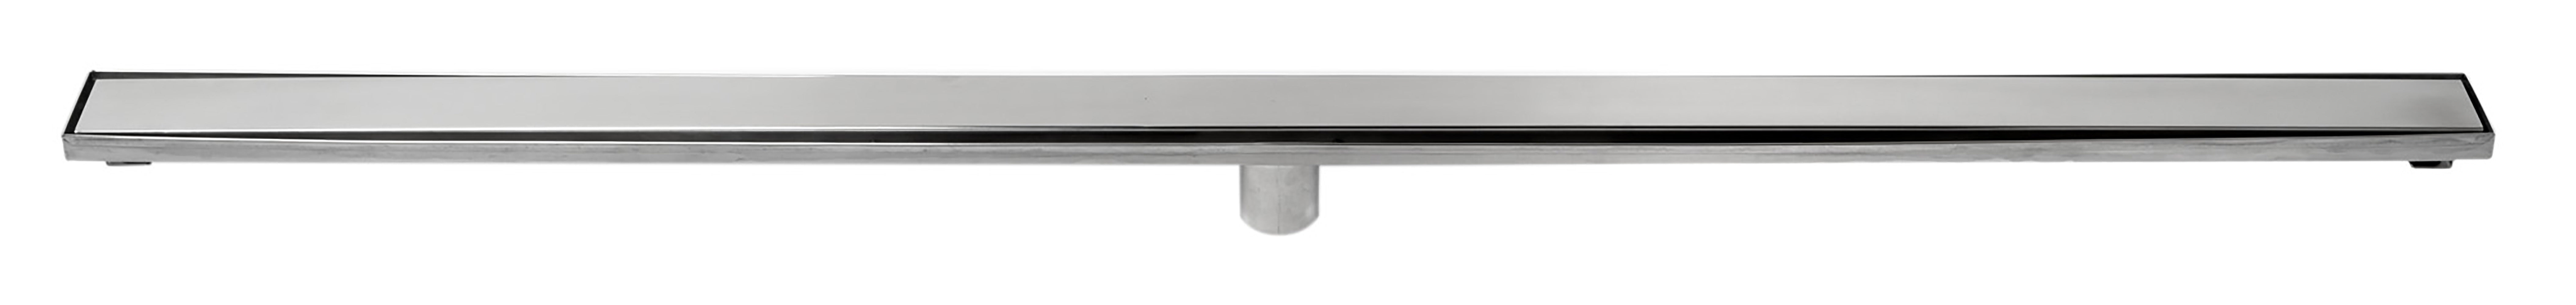 ALFI Brand - 59" Polished Stainless Steel Linear Shower Drain with Solid Cover | ABLD59B-PSS